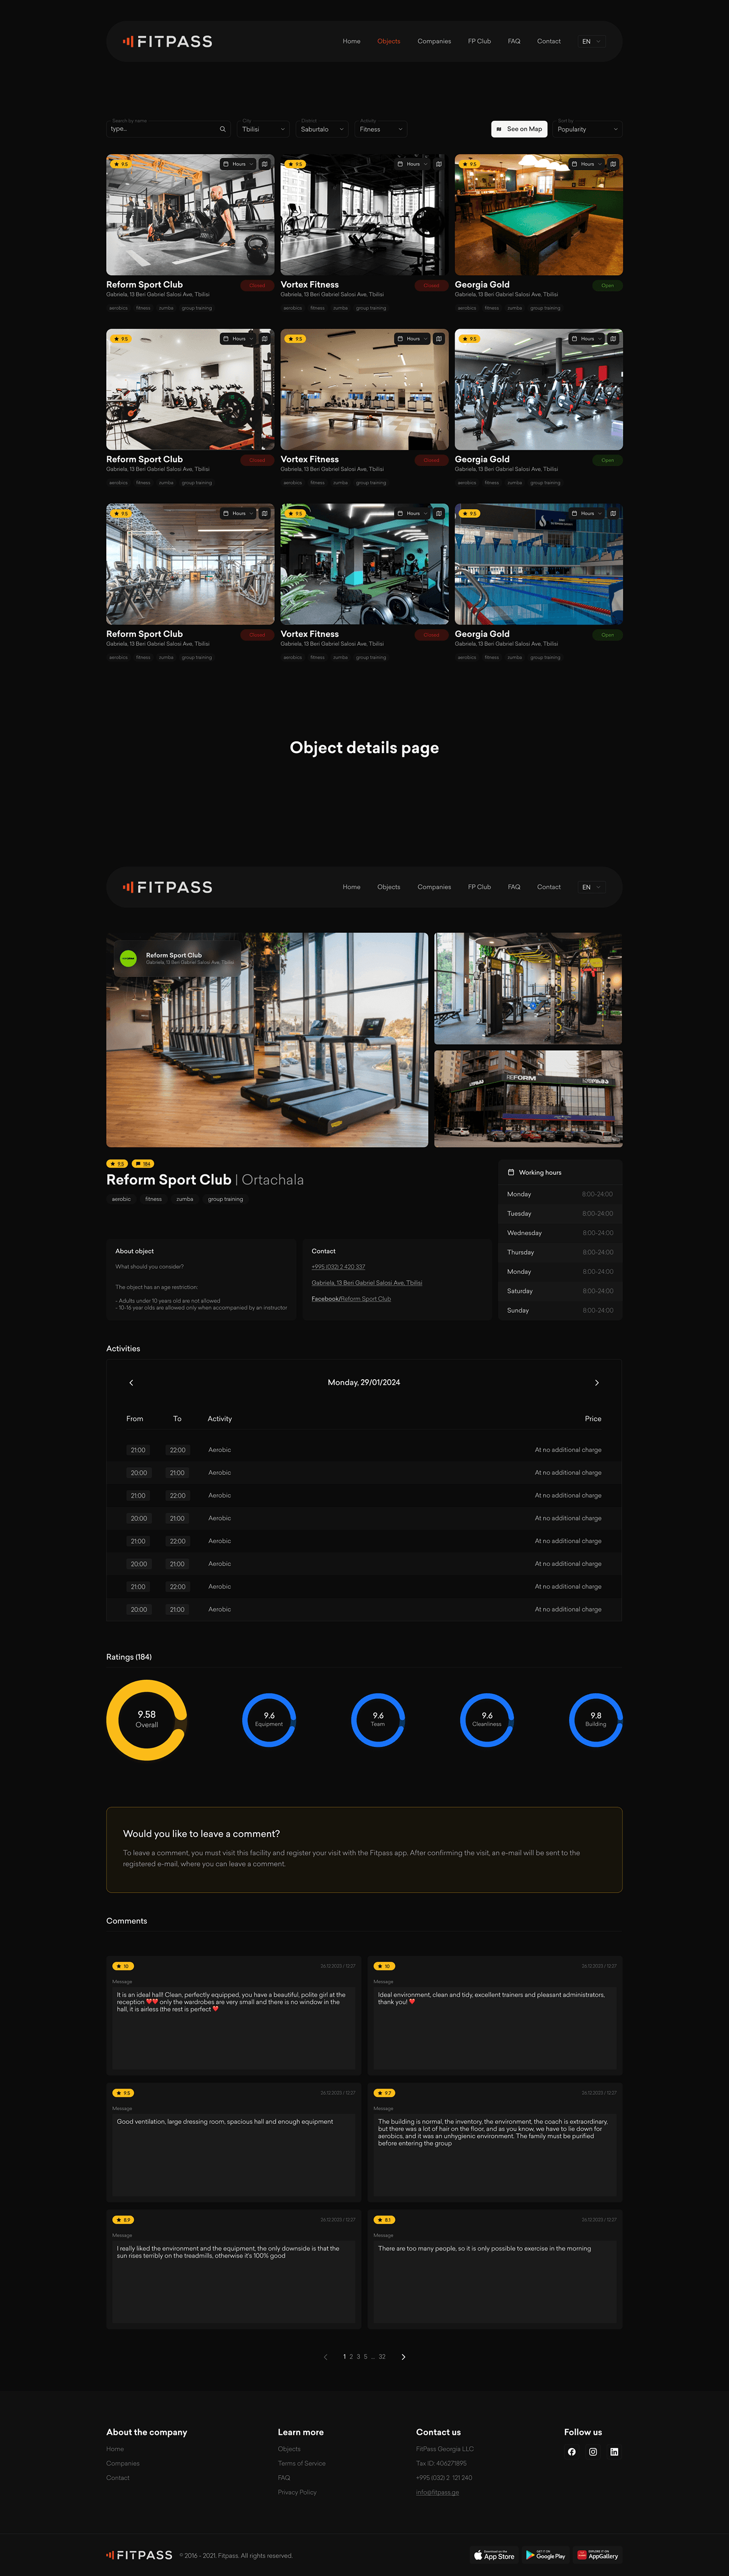 redesign uiux fitness gymnastic Fitness Design ui design FitPass gym redesign fit page